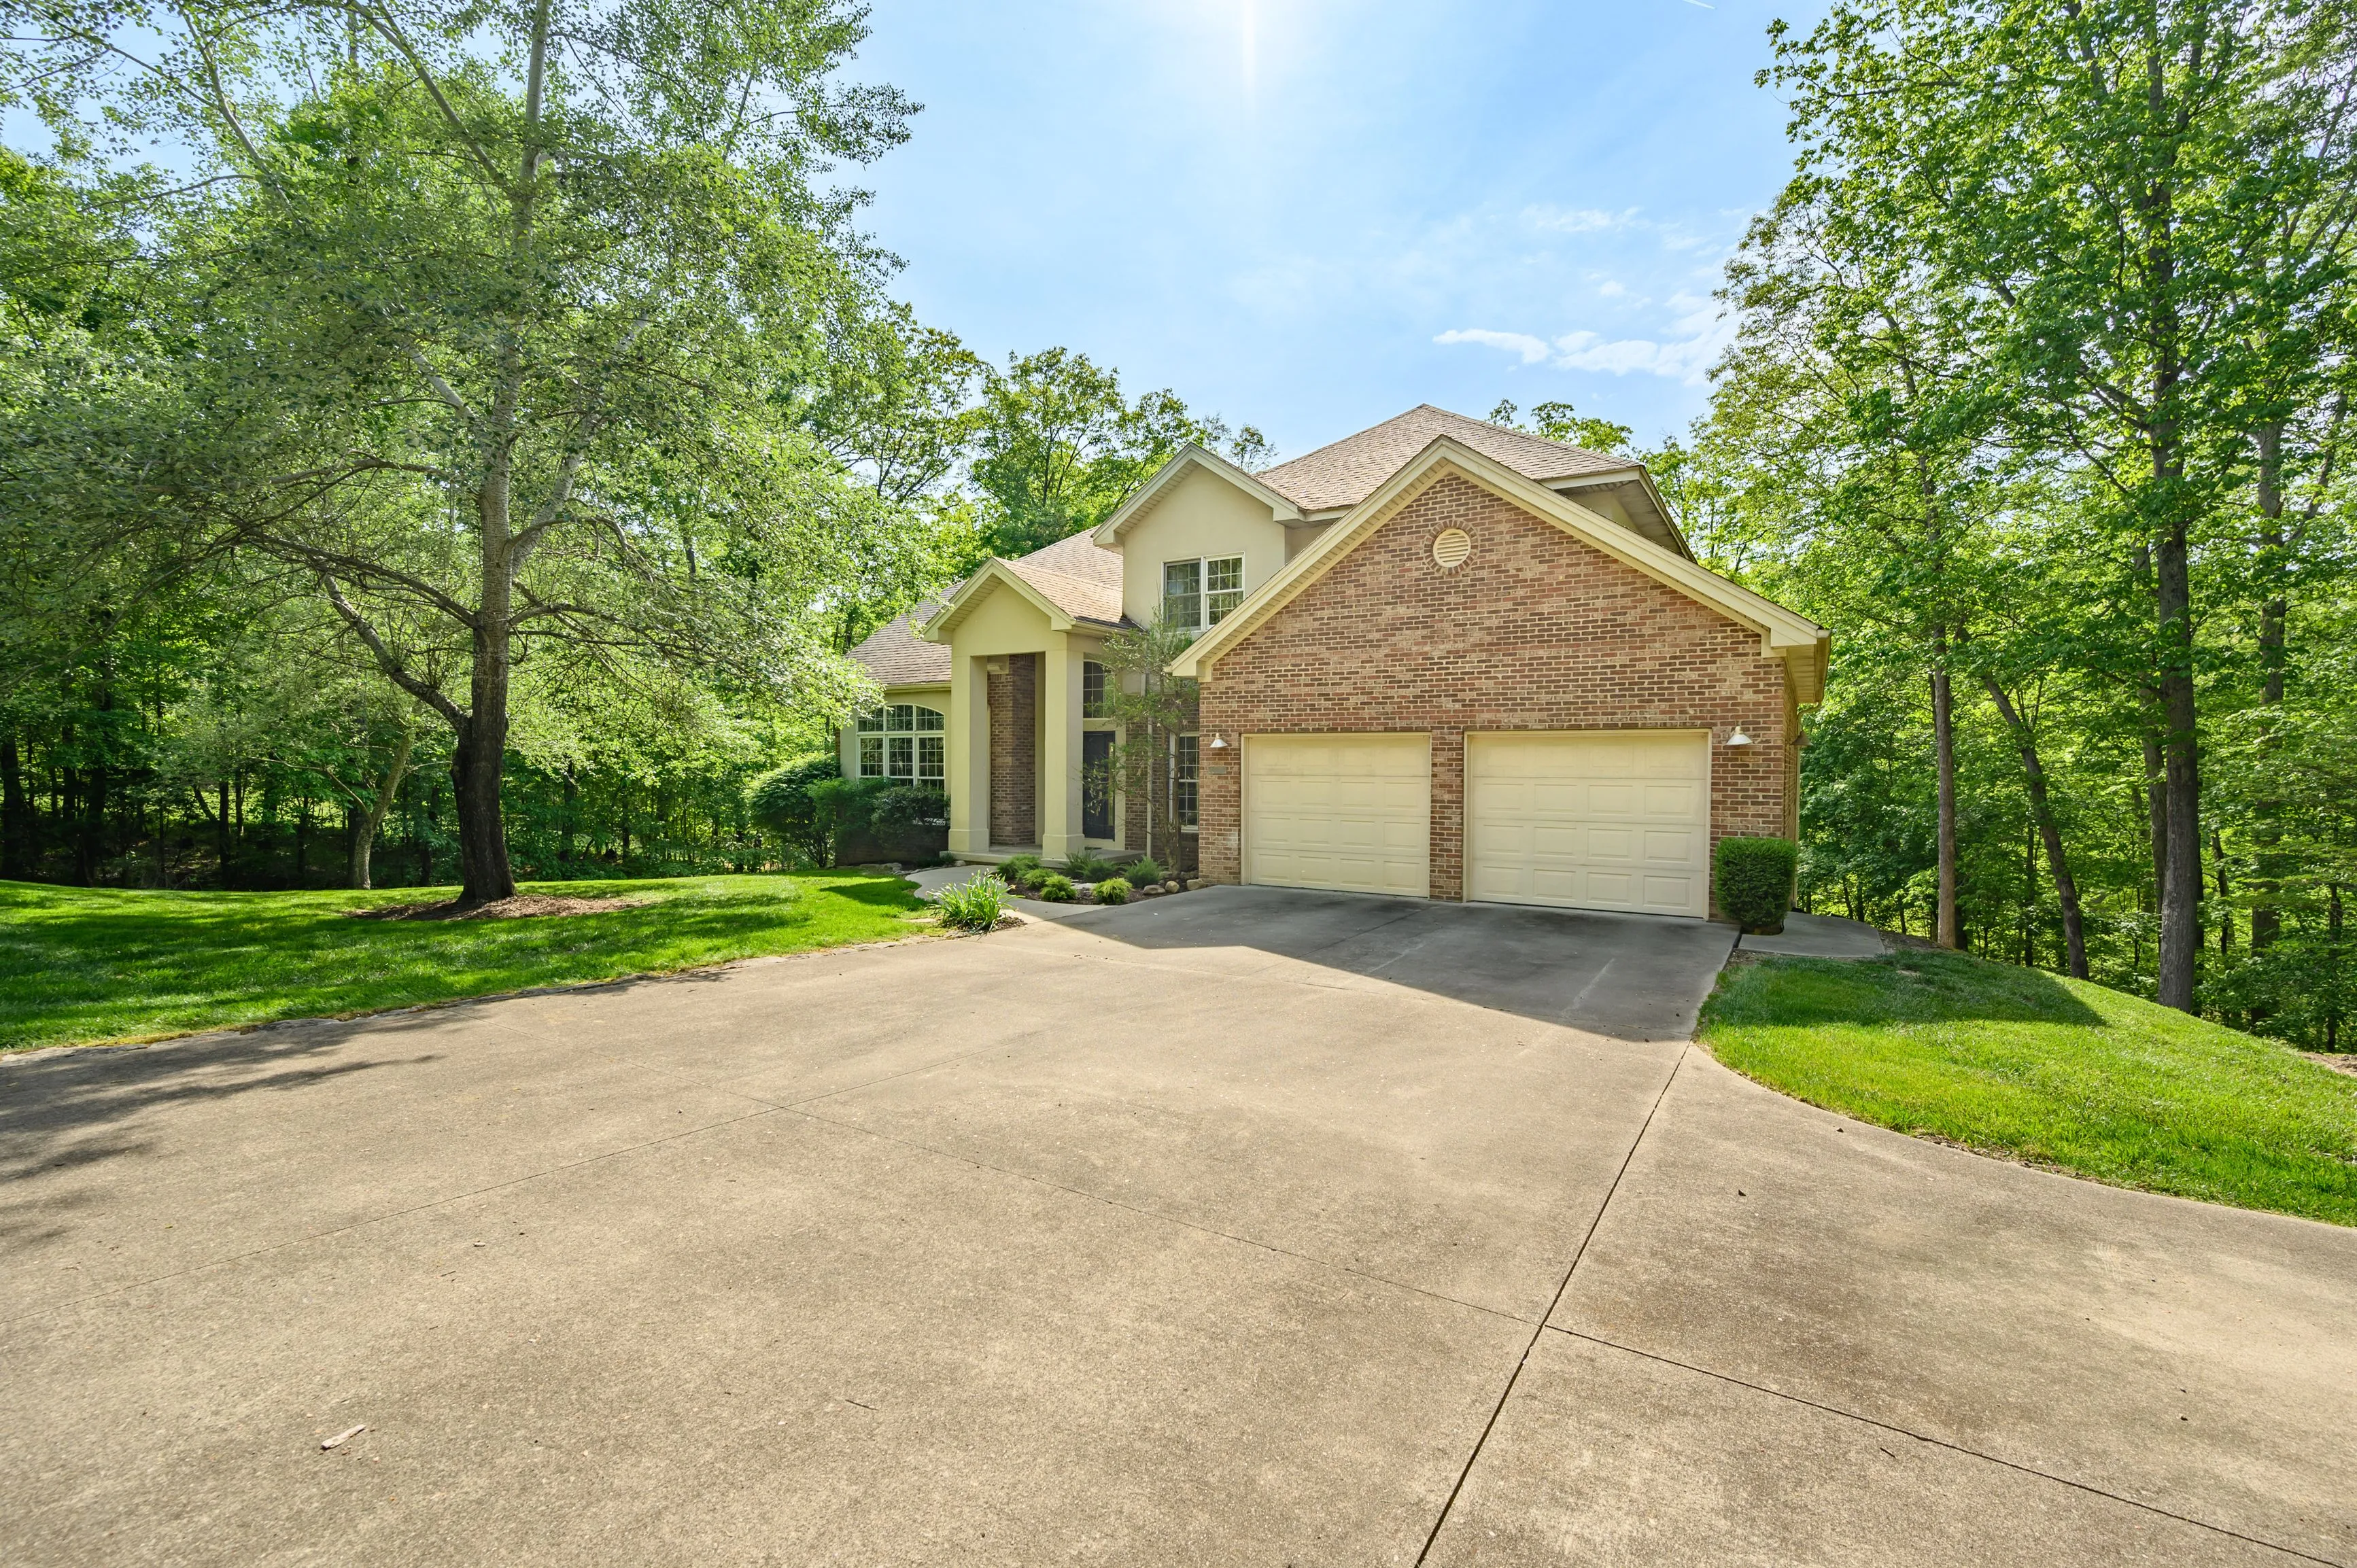 Brick house with double garage doors, surrounded by trees and a driveway, on a sunny day.